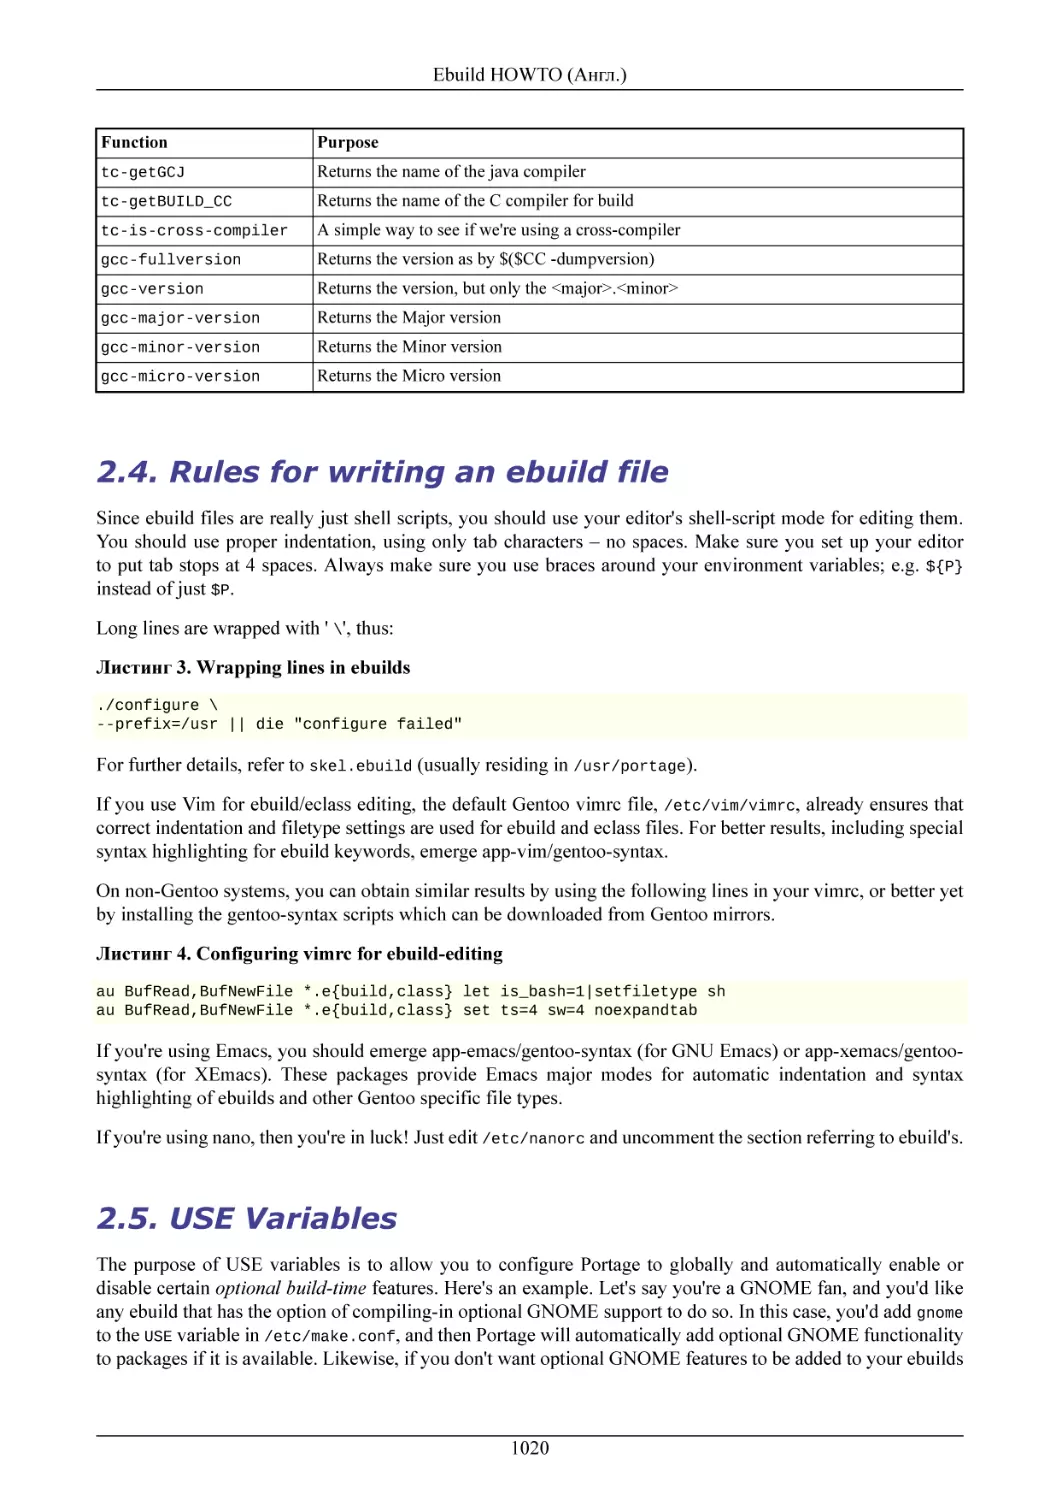 Rules for writing an ebuild file
USE Variables